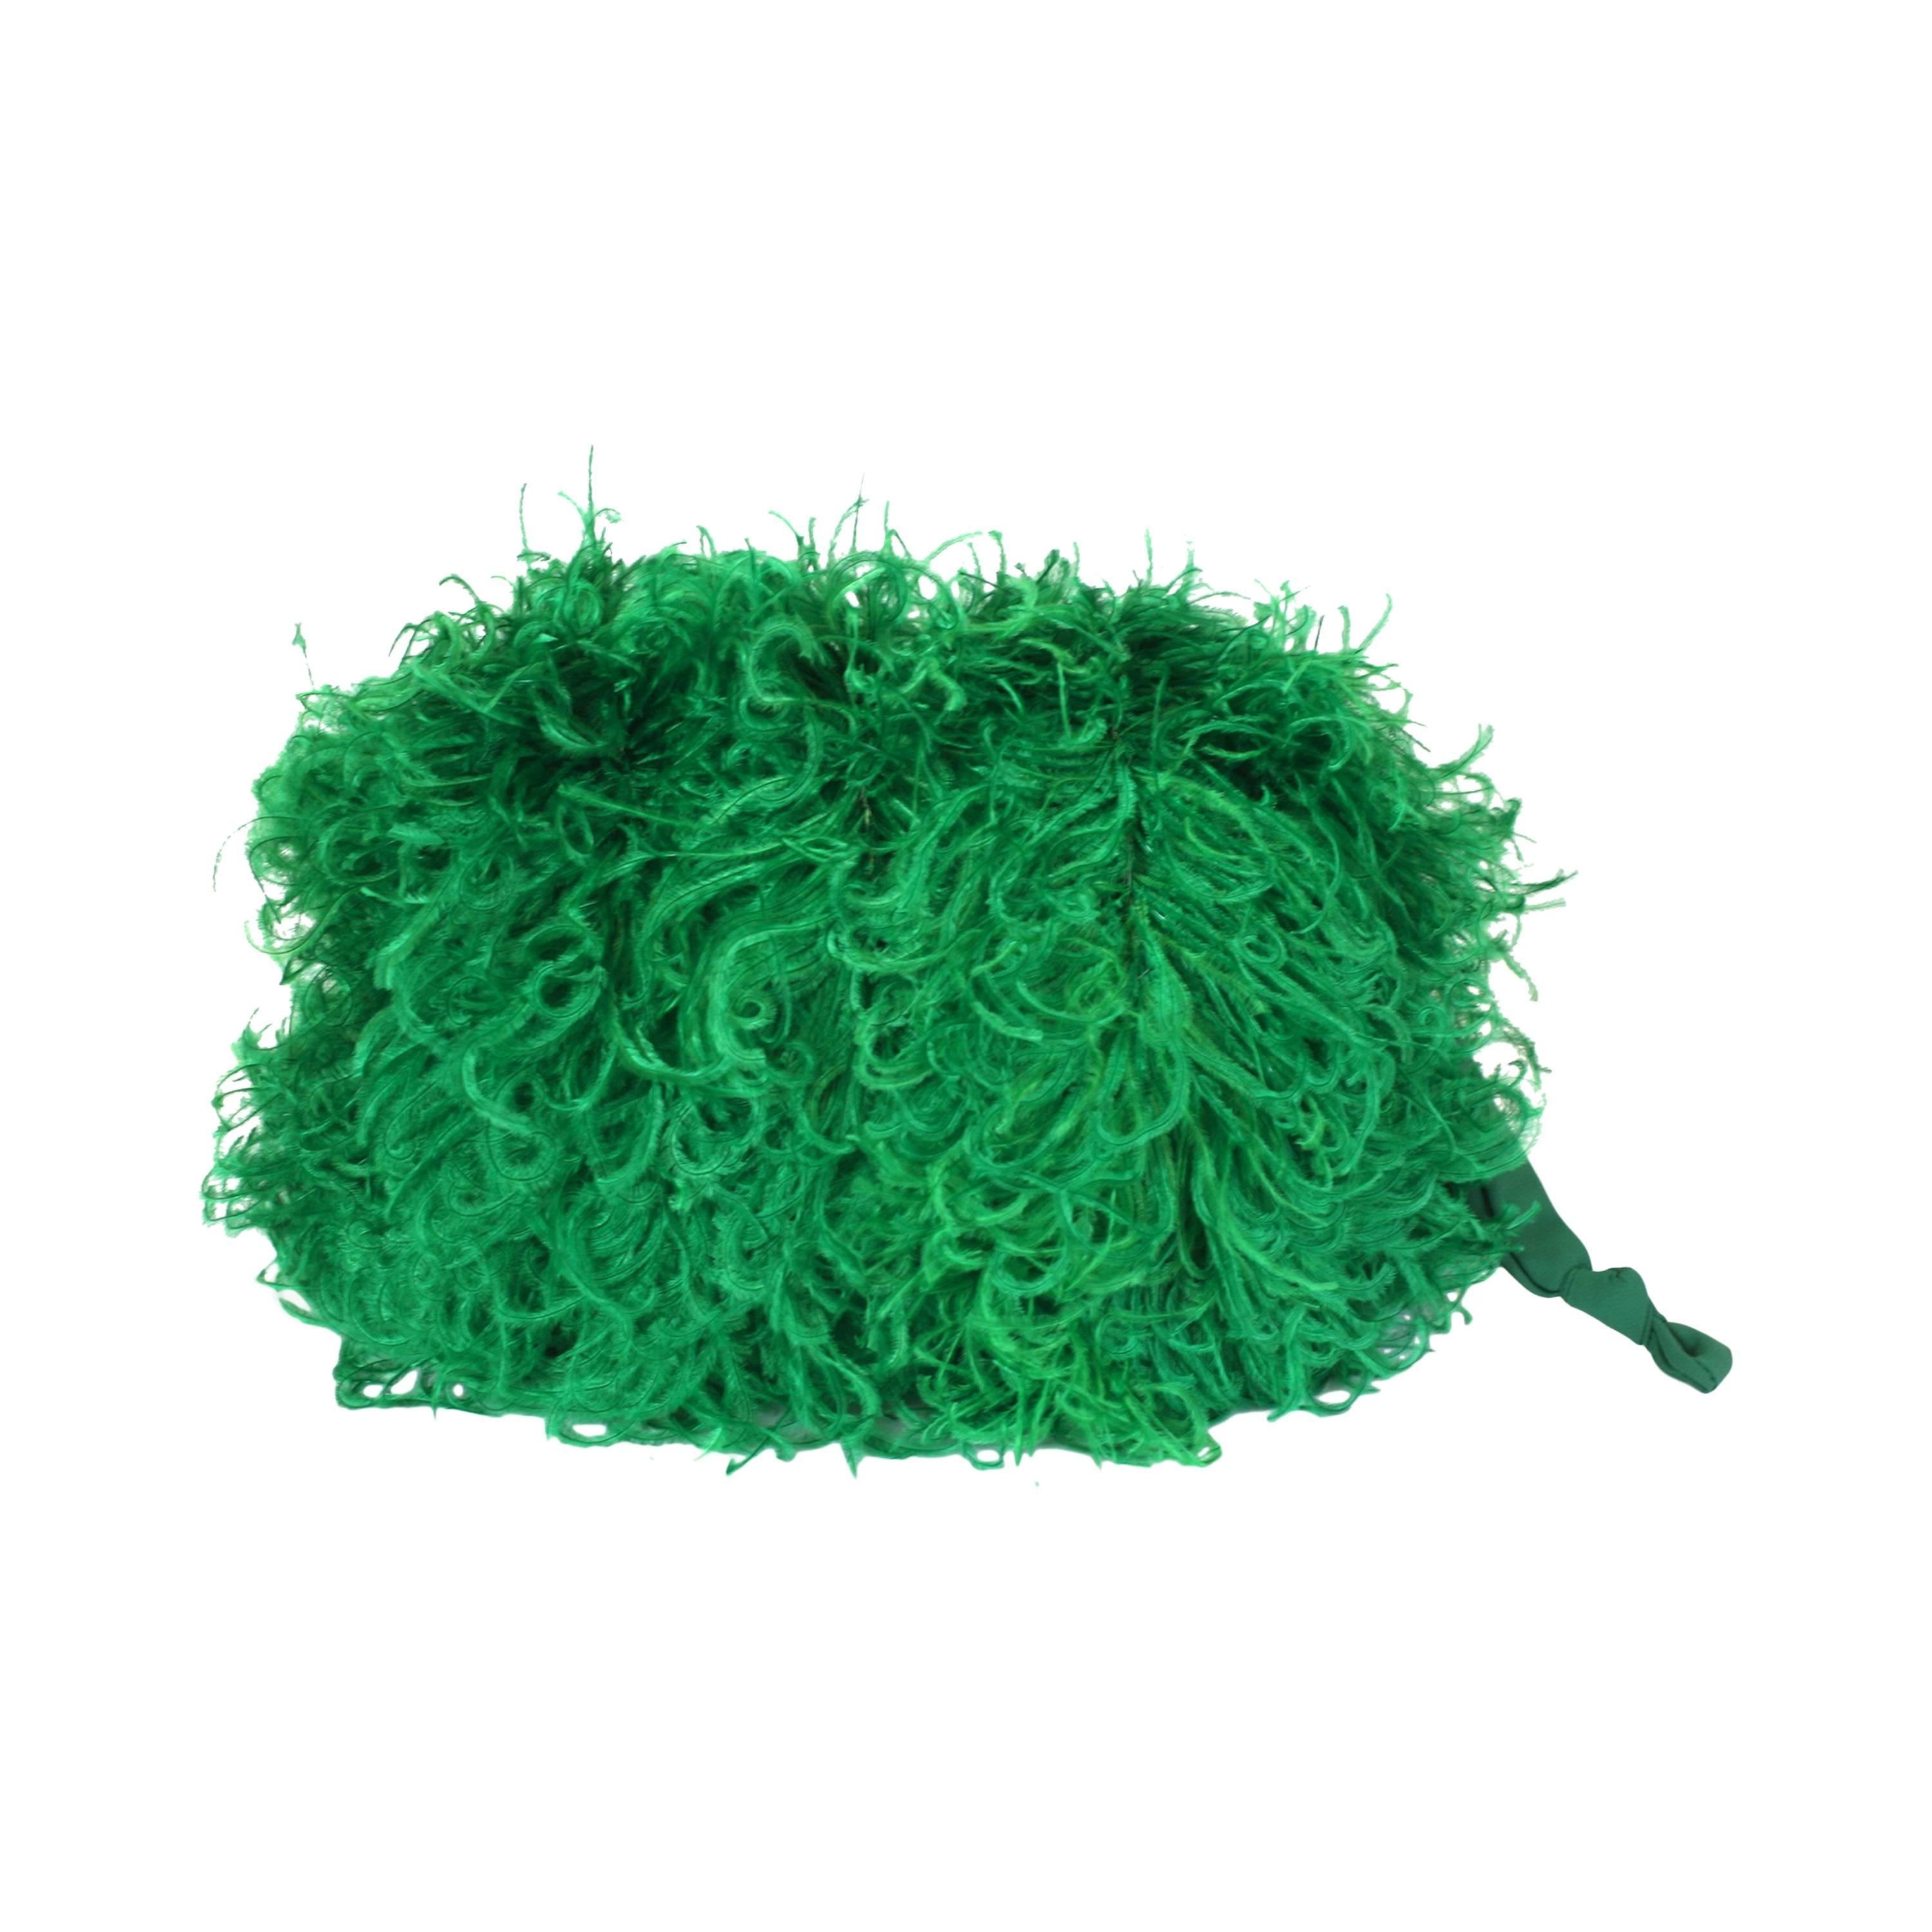 Vibrant Emerald Curled Ostrich Feather Muff 1930s